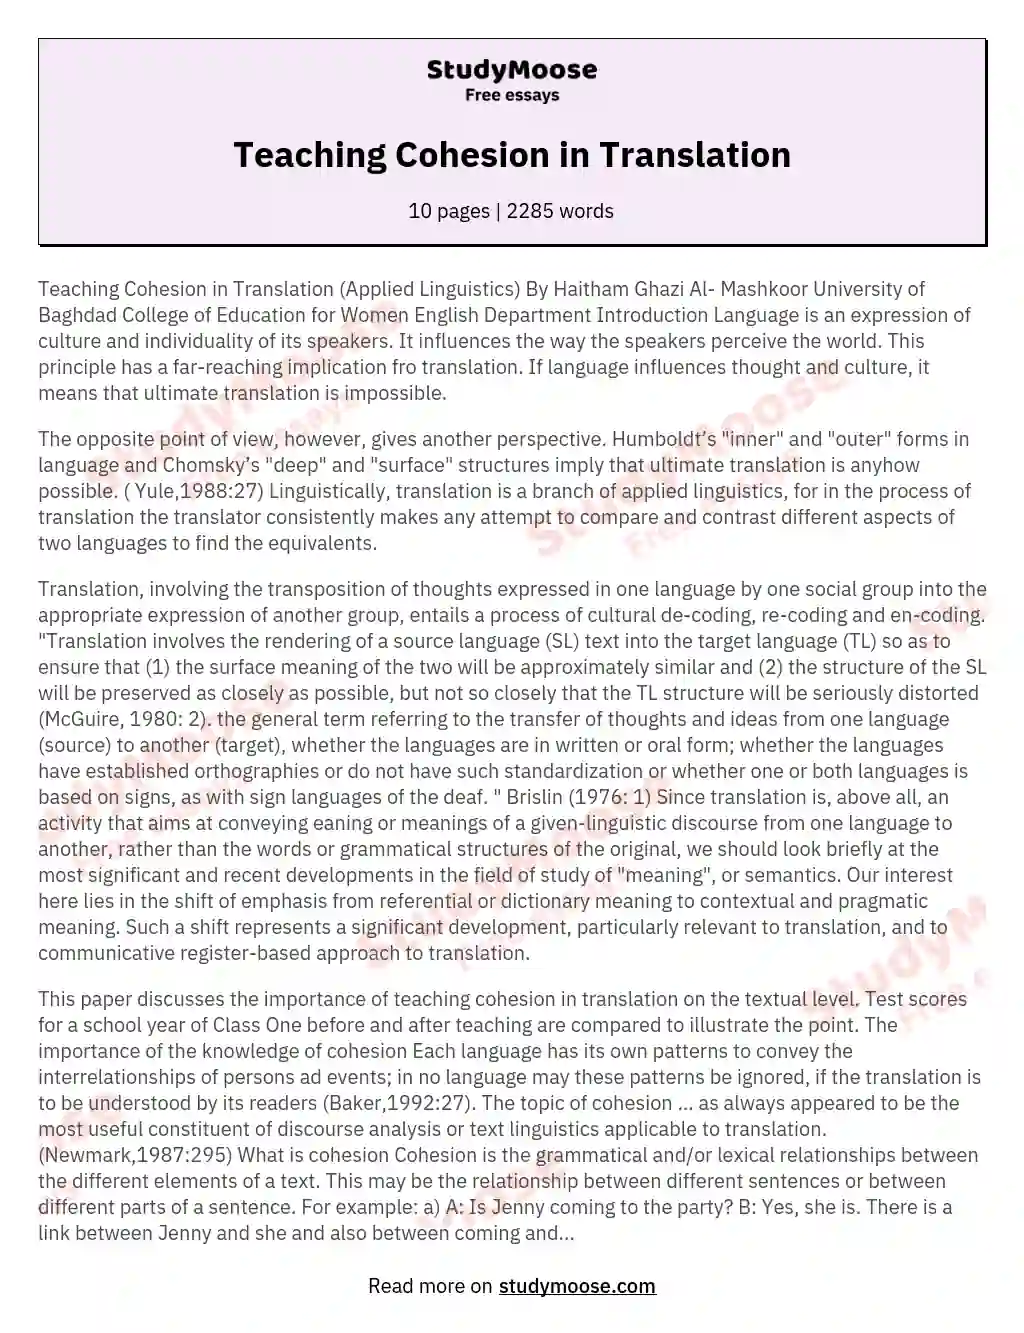 Teaching Cohesion in Translation essay